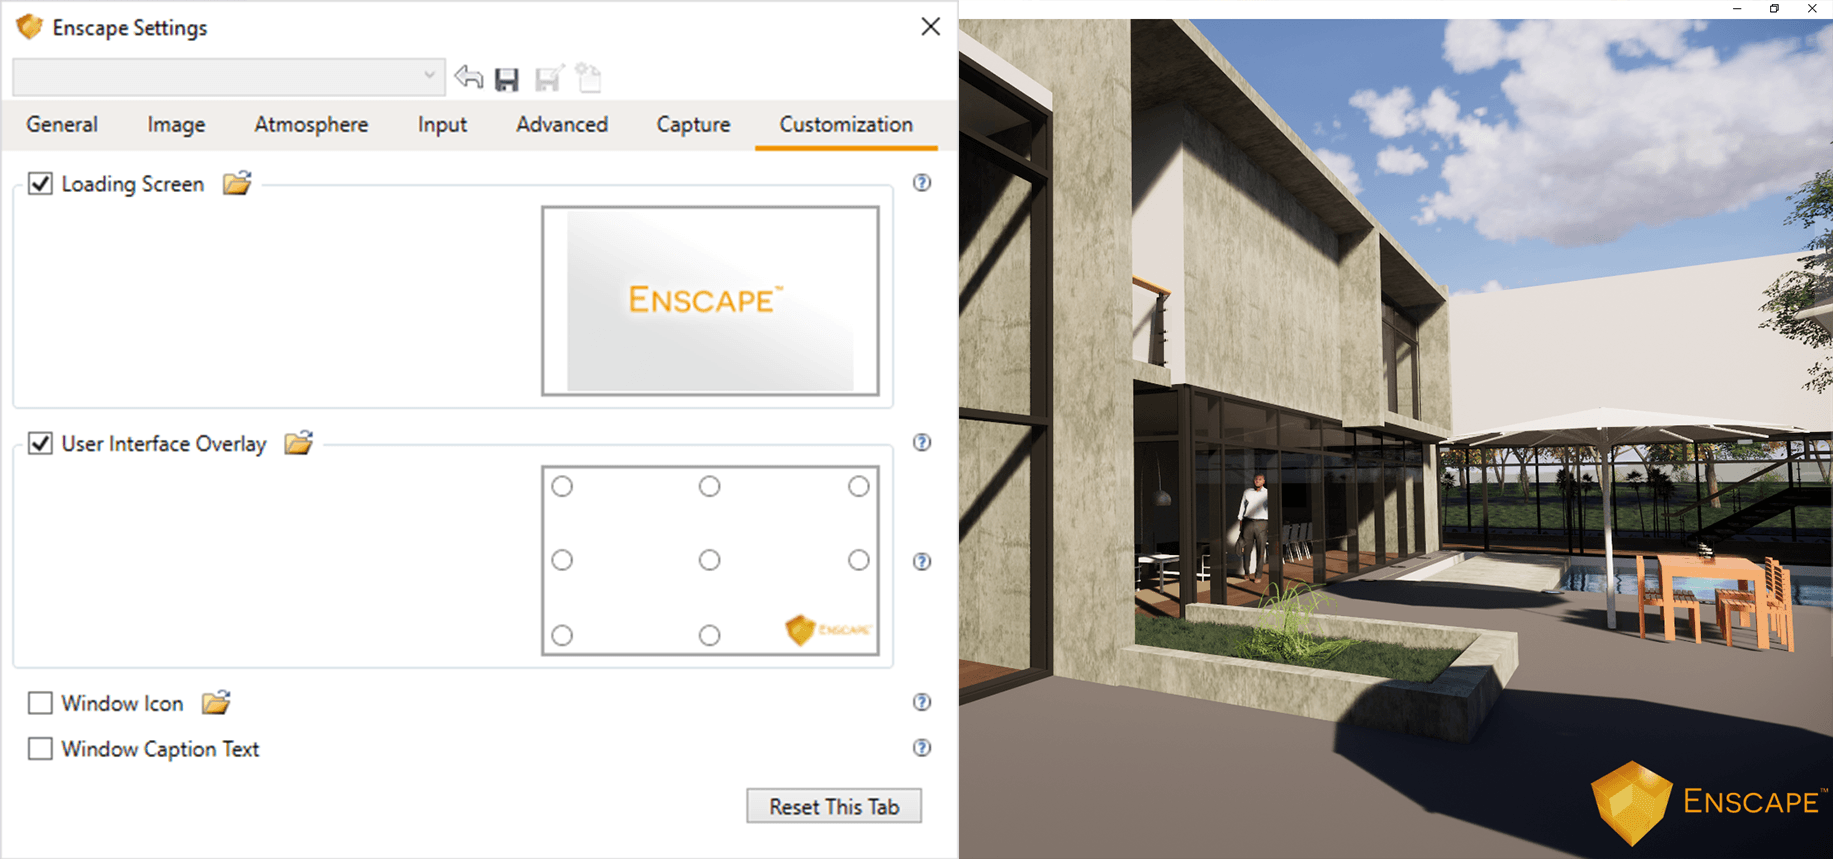 Enscape Logo - Best Practices: How to use executables for presentation - Enscape